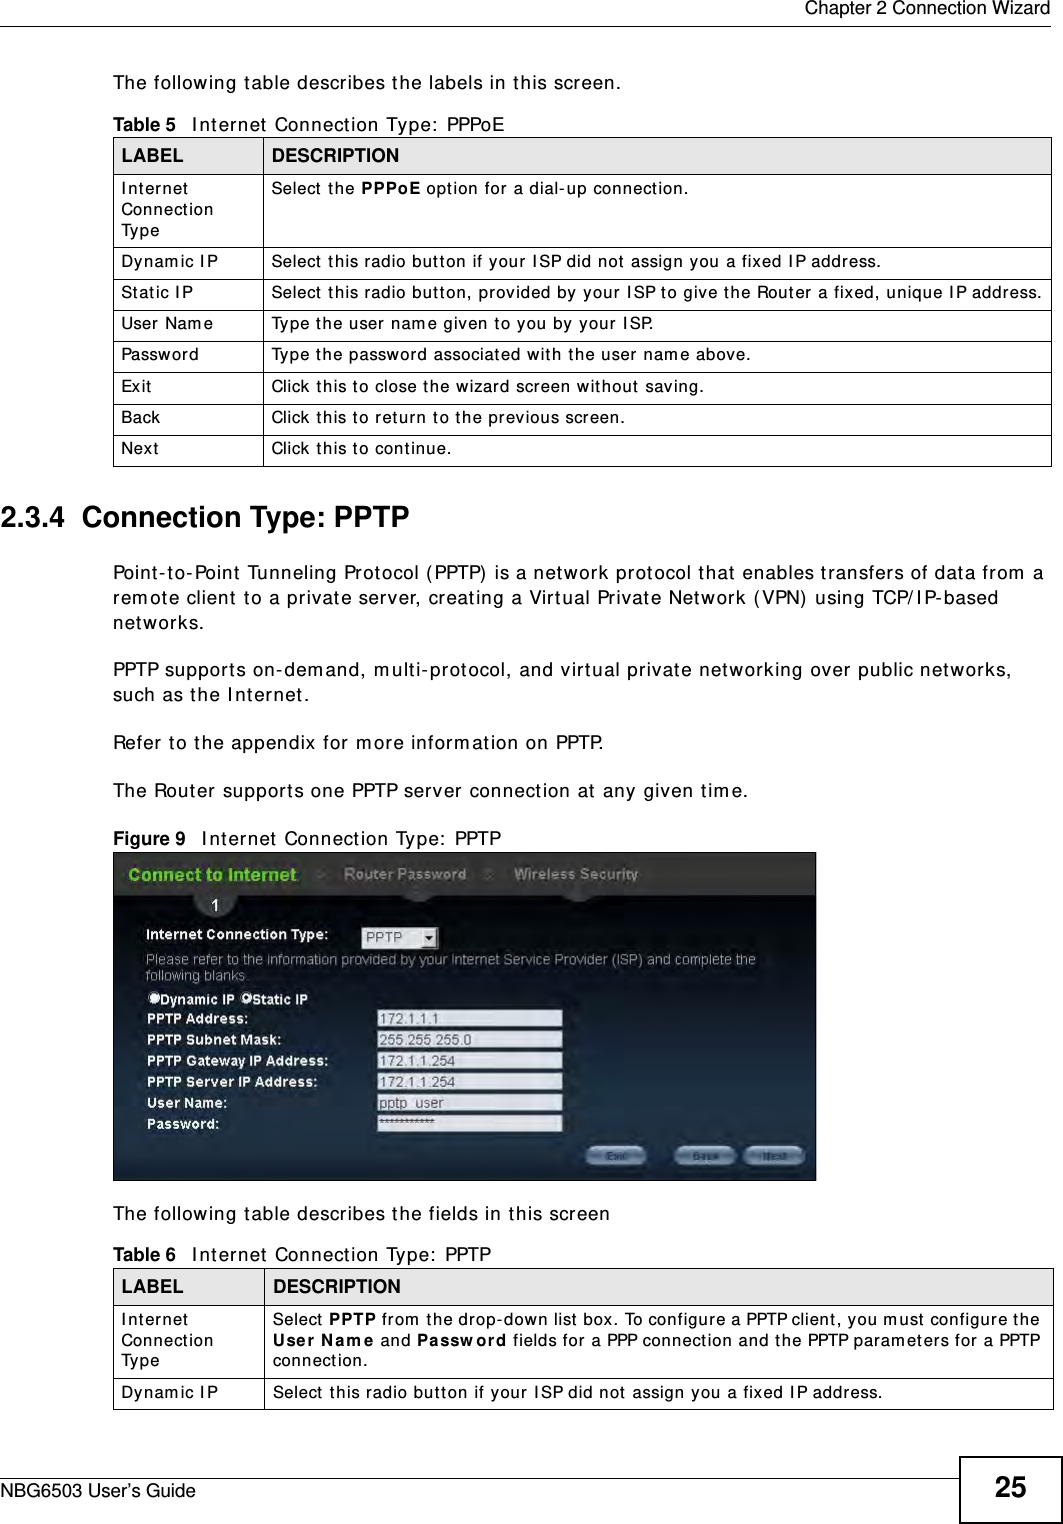  Chapter 2 Connection WizardNBG6503 User’s Guide 25The following table describes the labels in this screen.2.3.4  Connection Type: PPTPPoint-to-Point Tunneling Protocol (PPTP) is a network protocol that enables transfers of data from a remote client to a private server, creating a Virtual Private Network (VPN) using TCP/IP-based networks.PPTP supports on-demand, multi-protocol, and virtual private networking over public networks, such as the Internet.Refer to the appendix for more information on PPTP.The Router supports one PPTP server connection at any given time.Figure 9   Internet Connection Type: PPTP The following table describes the fields in this screenTable 5   Internet Connection Type: PPPoELABEL DESCRIPTIONInternet Connection TypeSelect the PPPoE option for a dial-up connection.Dynamic IP Select this radio button if your ISP did not assign you a fixed IP address.Static IP Select this radio button, provided by your ISP to give the Router a fixed, unique IP address.User Name Type the user name given to you by your ISP. Password  Type the password associated with the user name above.Exit Click this to close the wizard screen without saving.Back Click this to return to the previous screen.Next Click this to continue. Table 6   Internet Connection Type: PPTPLABEL DESCRIPTIONInternet Connection TypeSelect PPTP from the drop-down list box. To configure a PPTP client, you must configure the User Name and Password fields for a PPP connection and the PPTP parameters for a PPTP connection.Dynamic IP Select this radio button if your ISP did not assign you a fixed IP address.